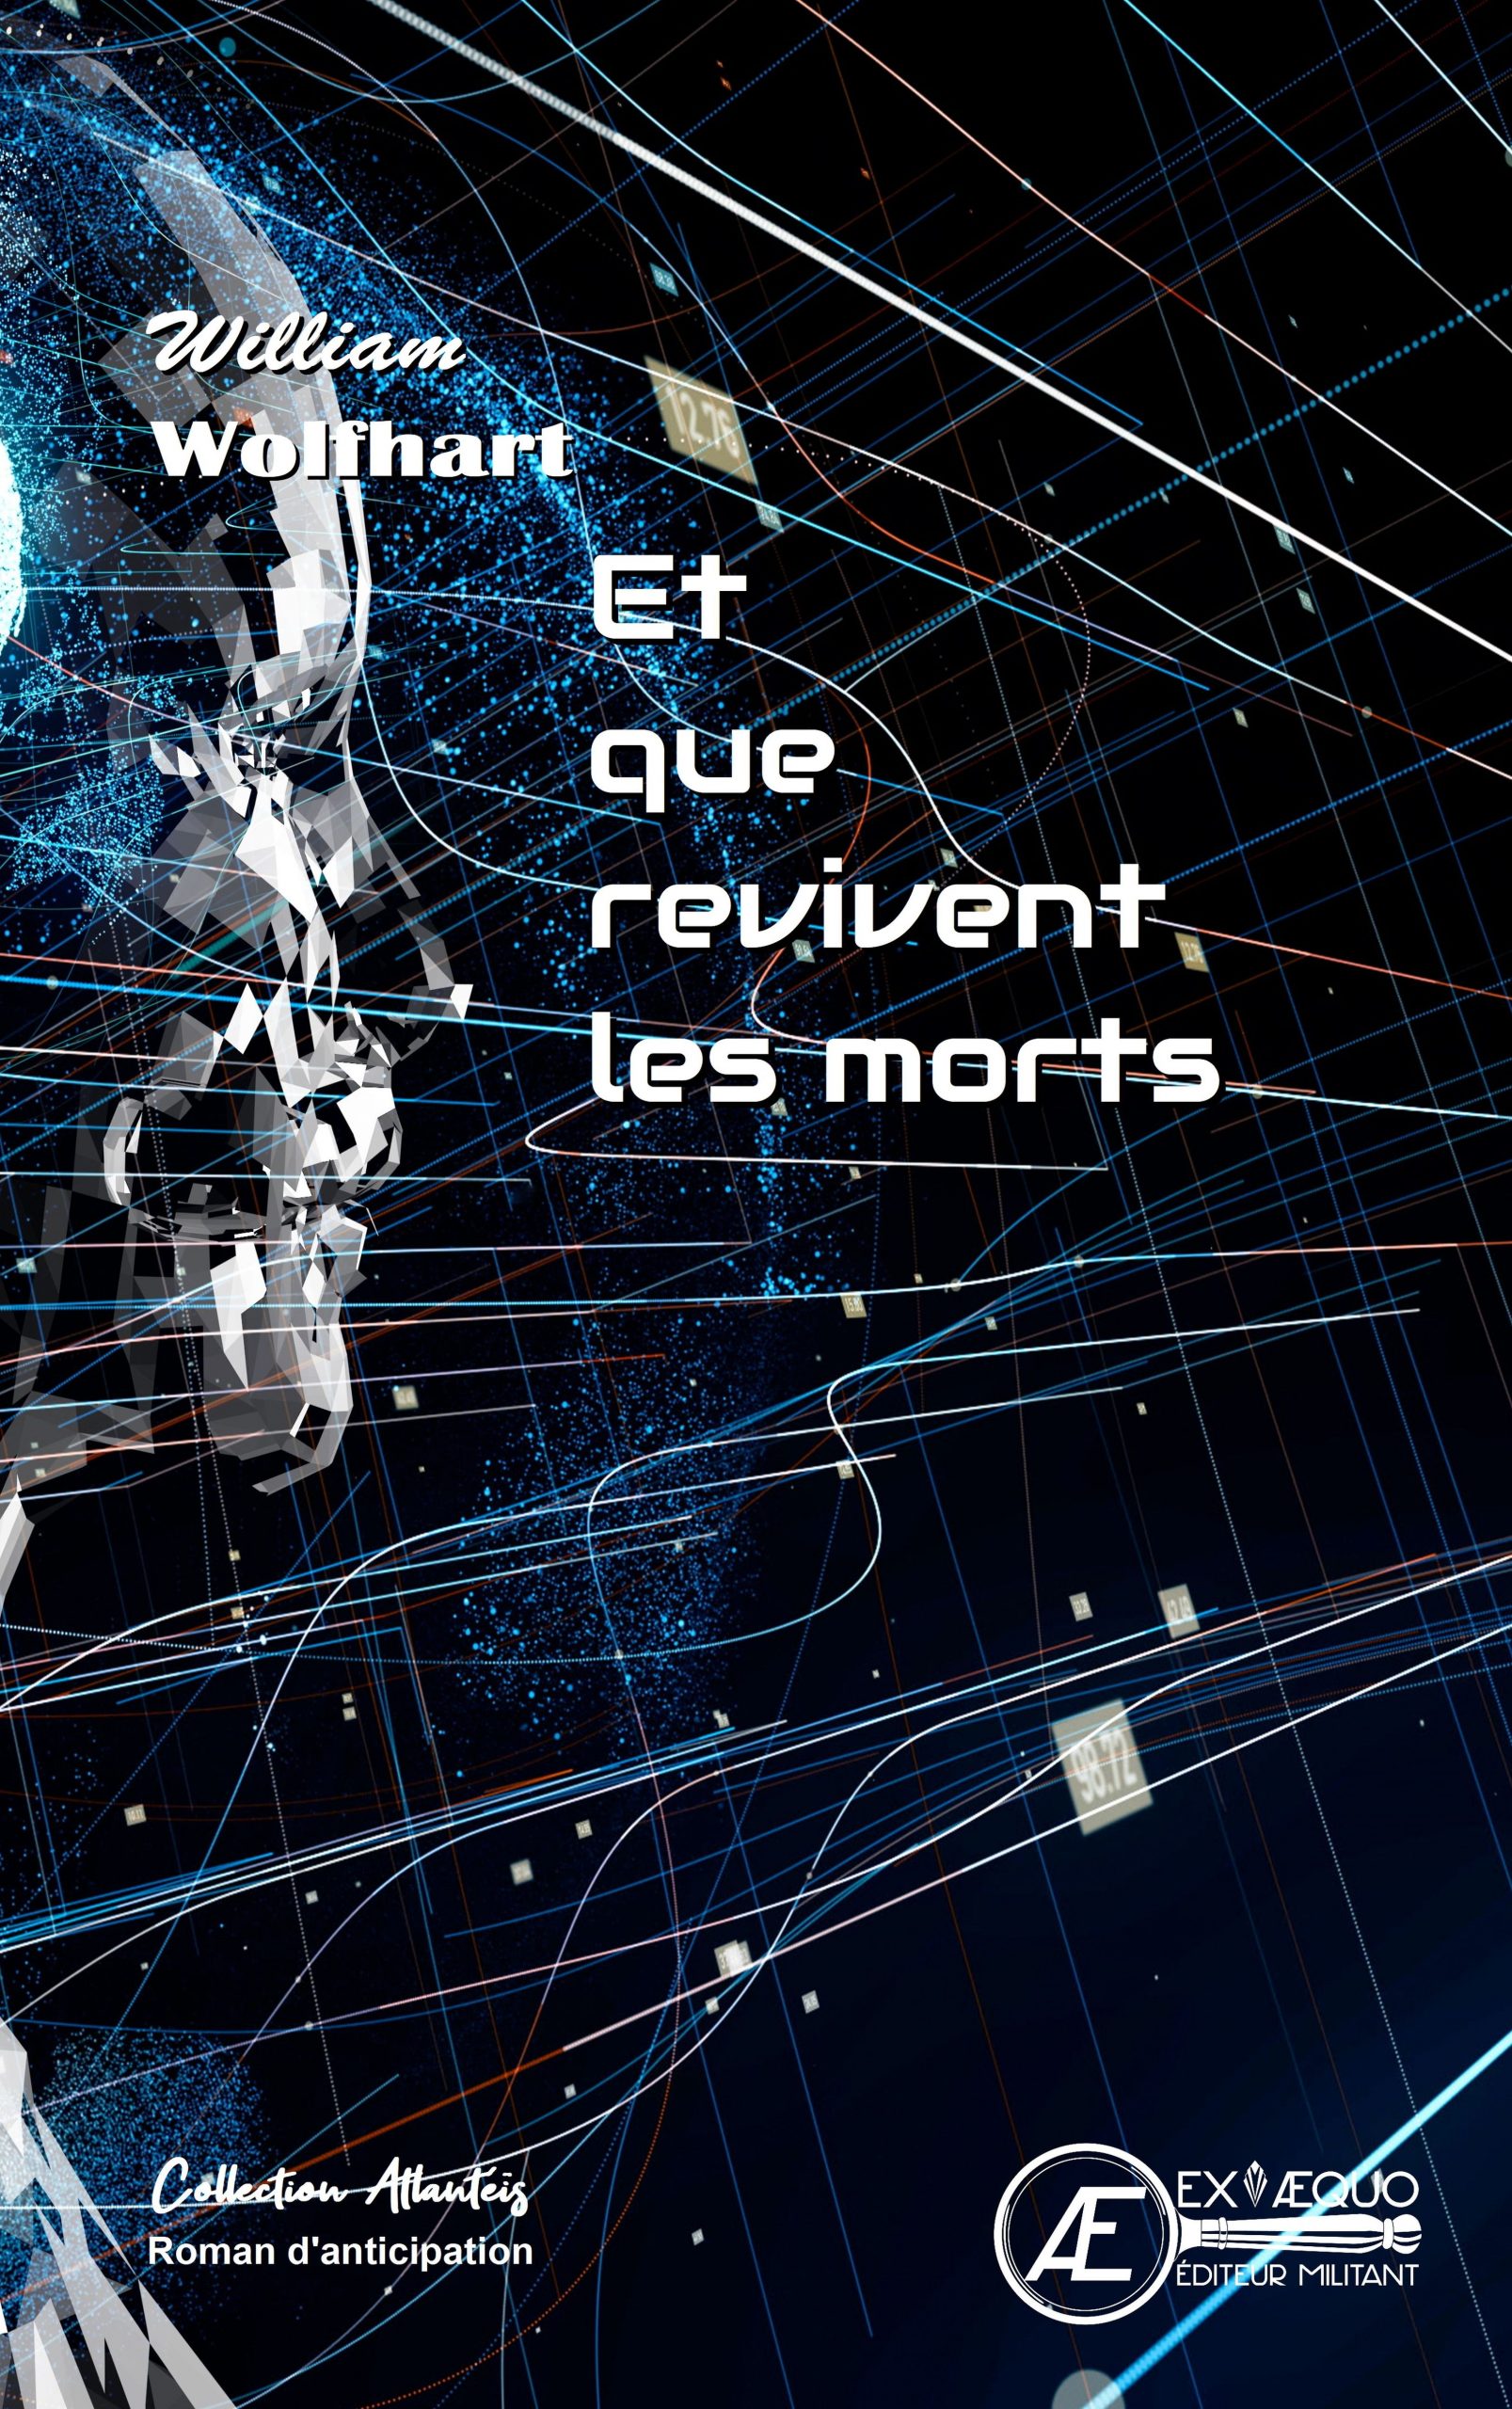 You are currently viewing Et que revivent les morts, de William Wolfhart